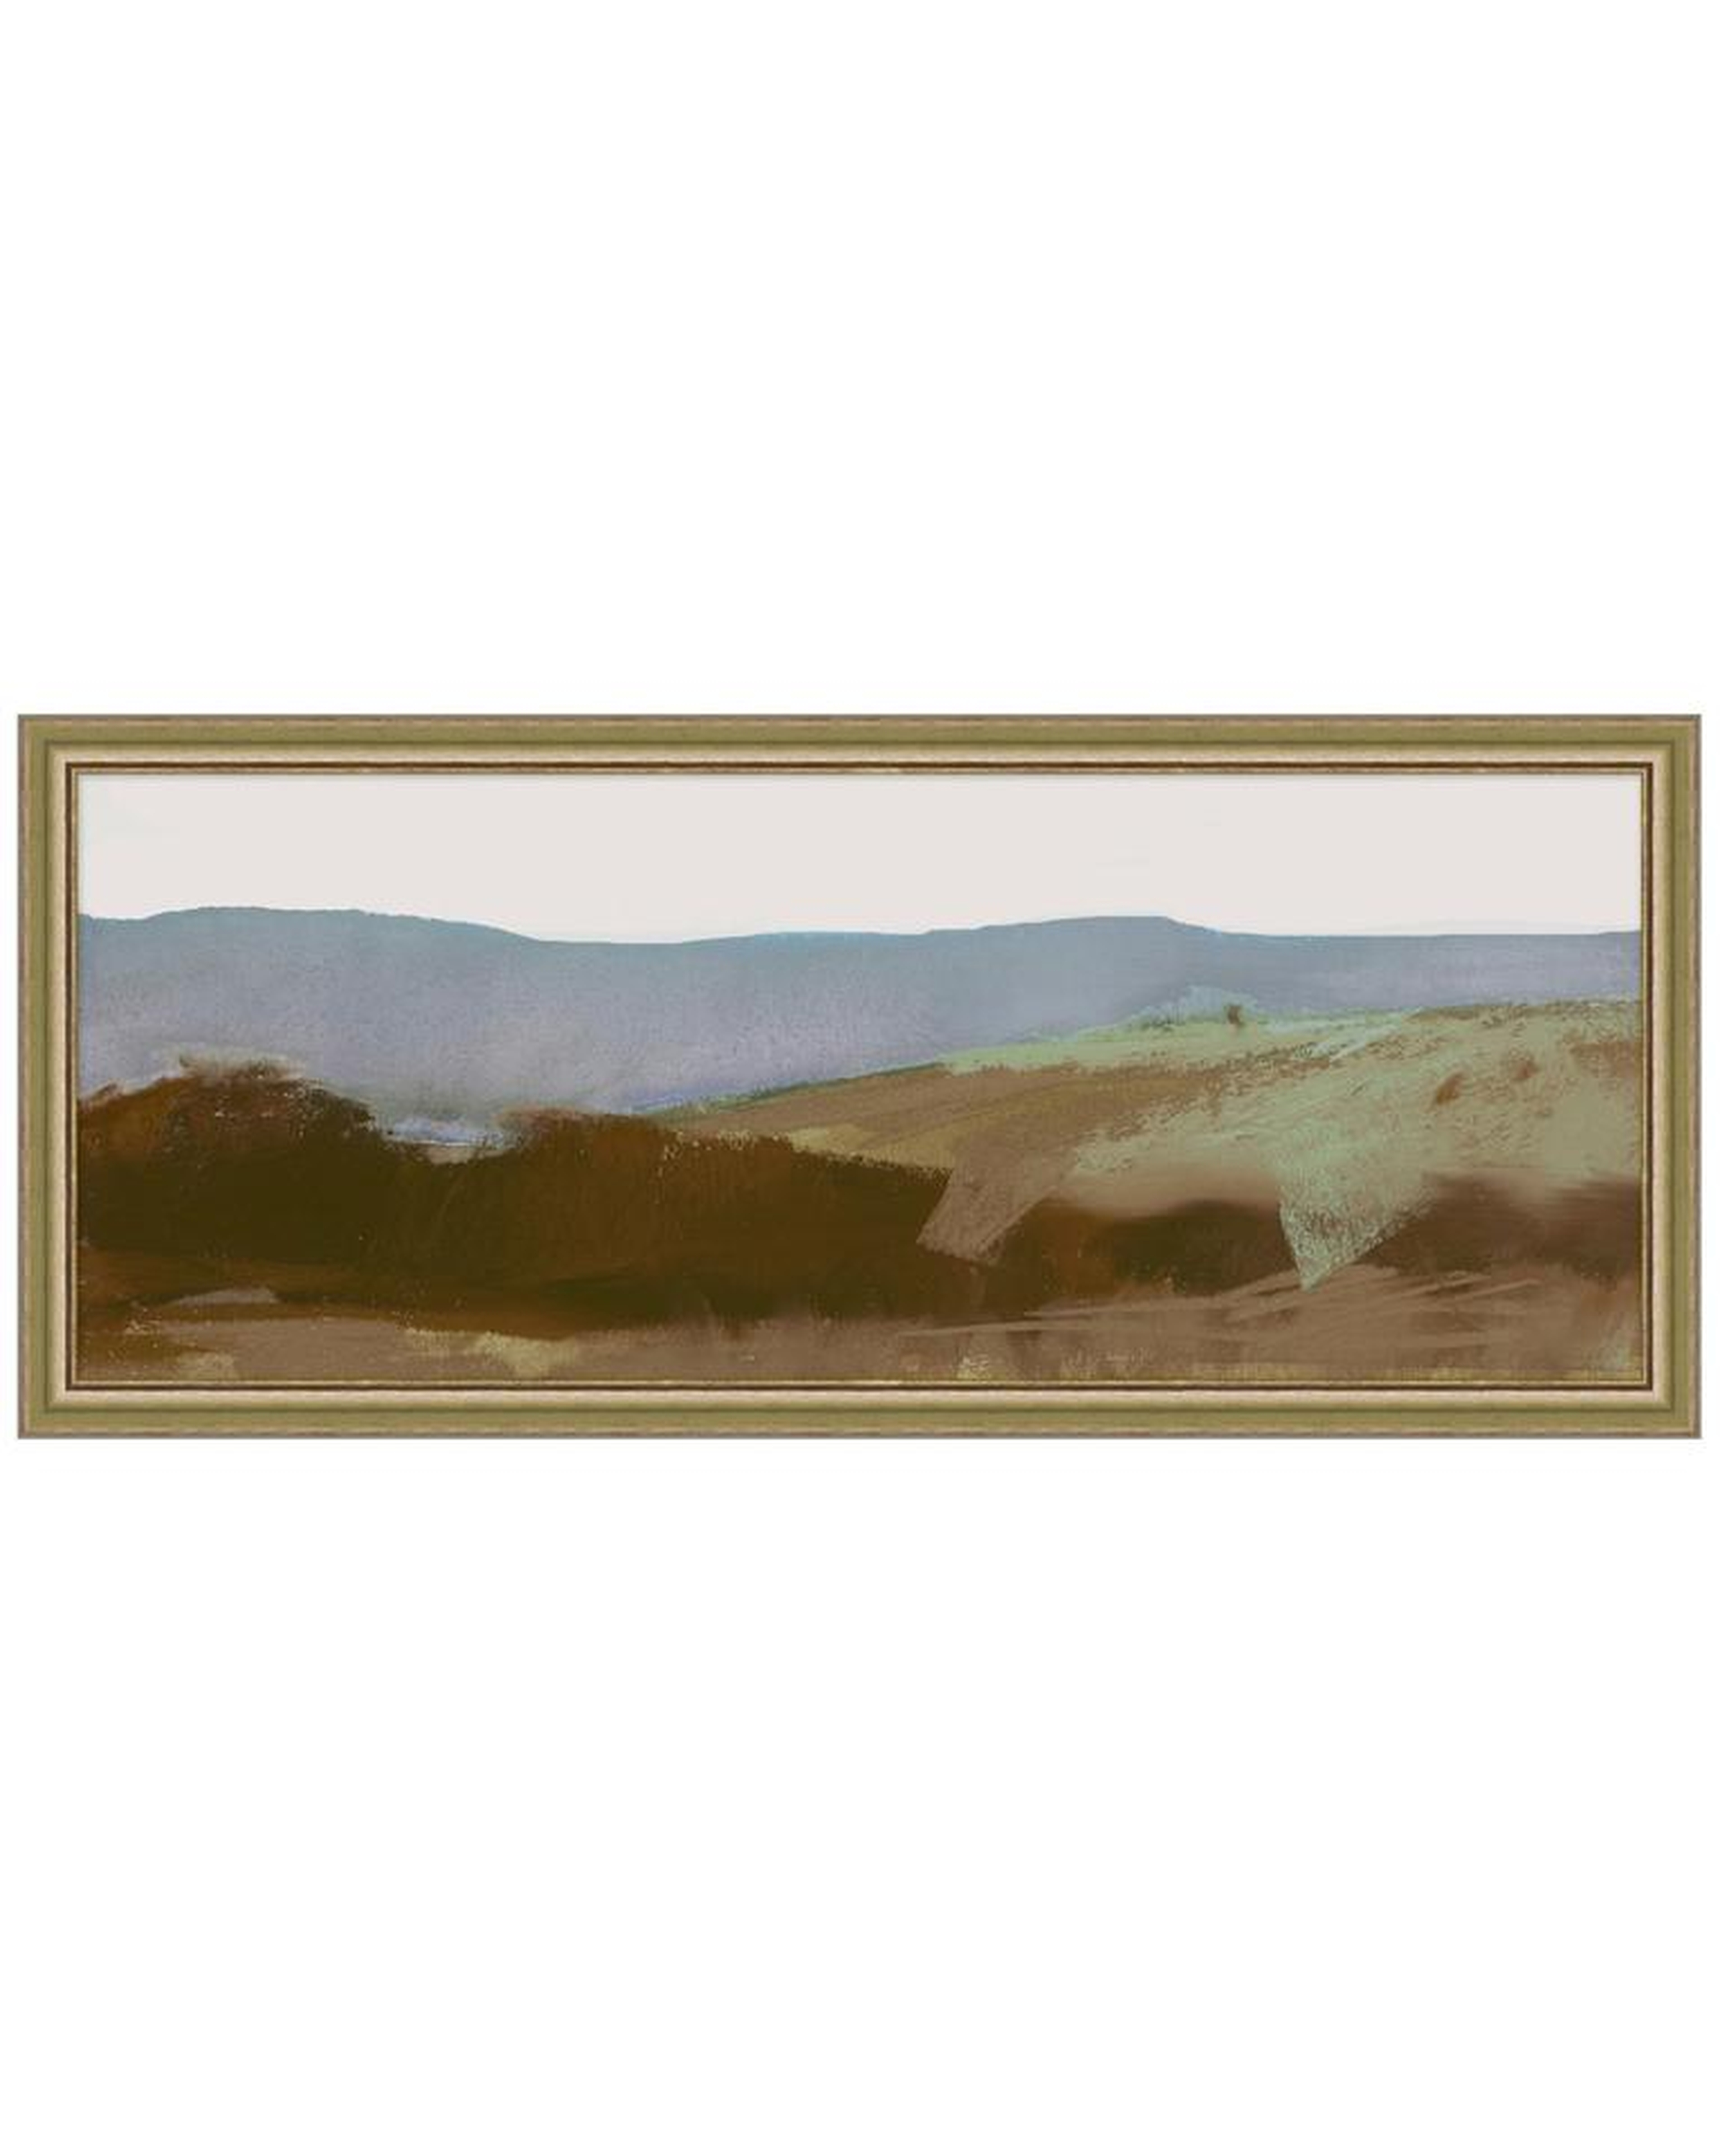 ABSTRACT LANDSCAPE 1 Framed Art - Large - McGee & Co.